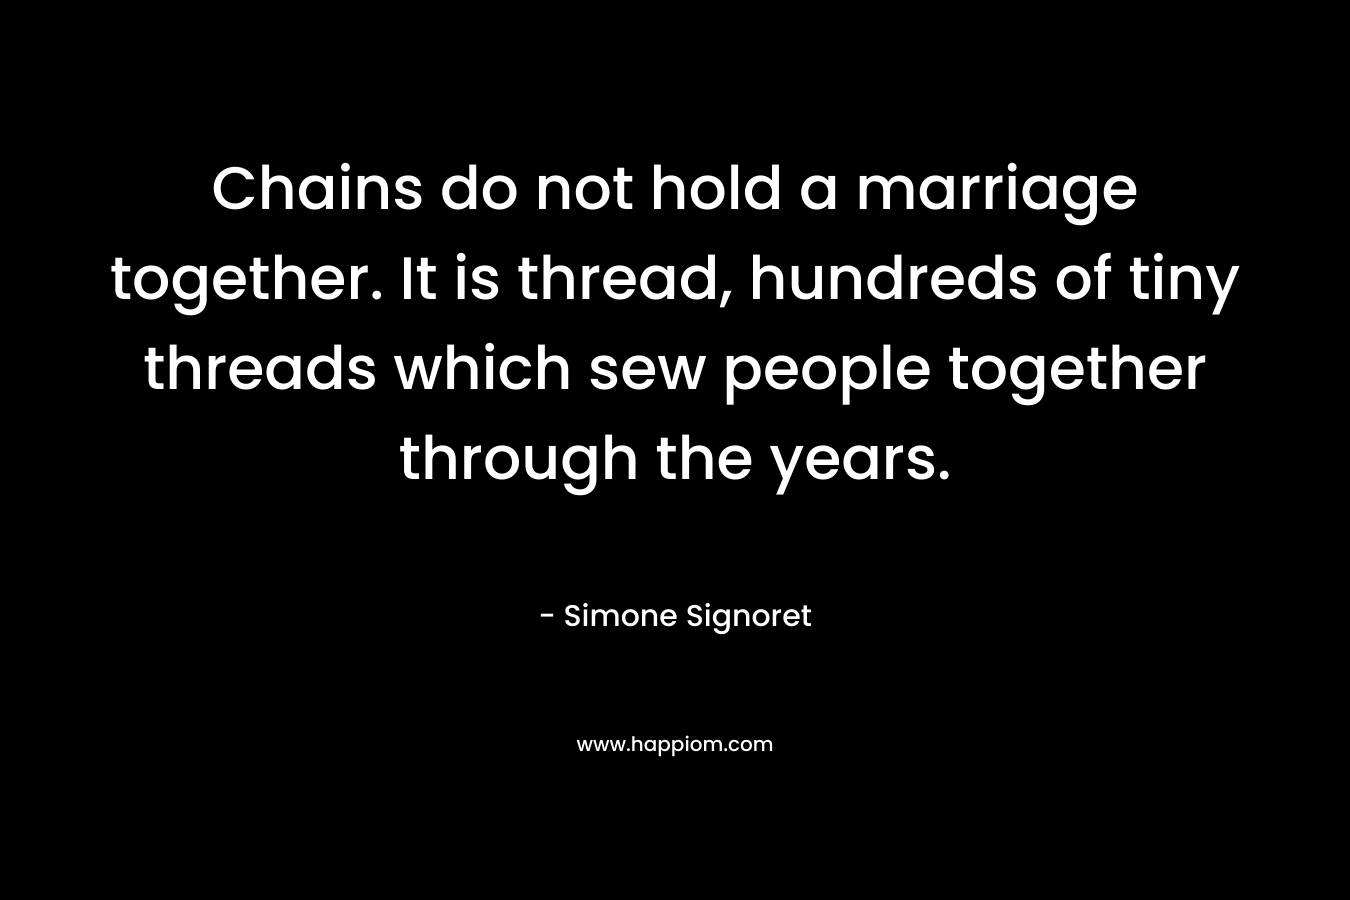 Chains do not hold a marriage together. It is thread, hundreds of tiny threads which sew people together through the years. – Simone Signoret